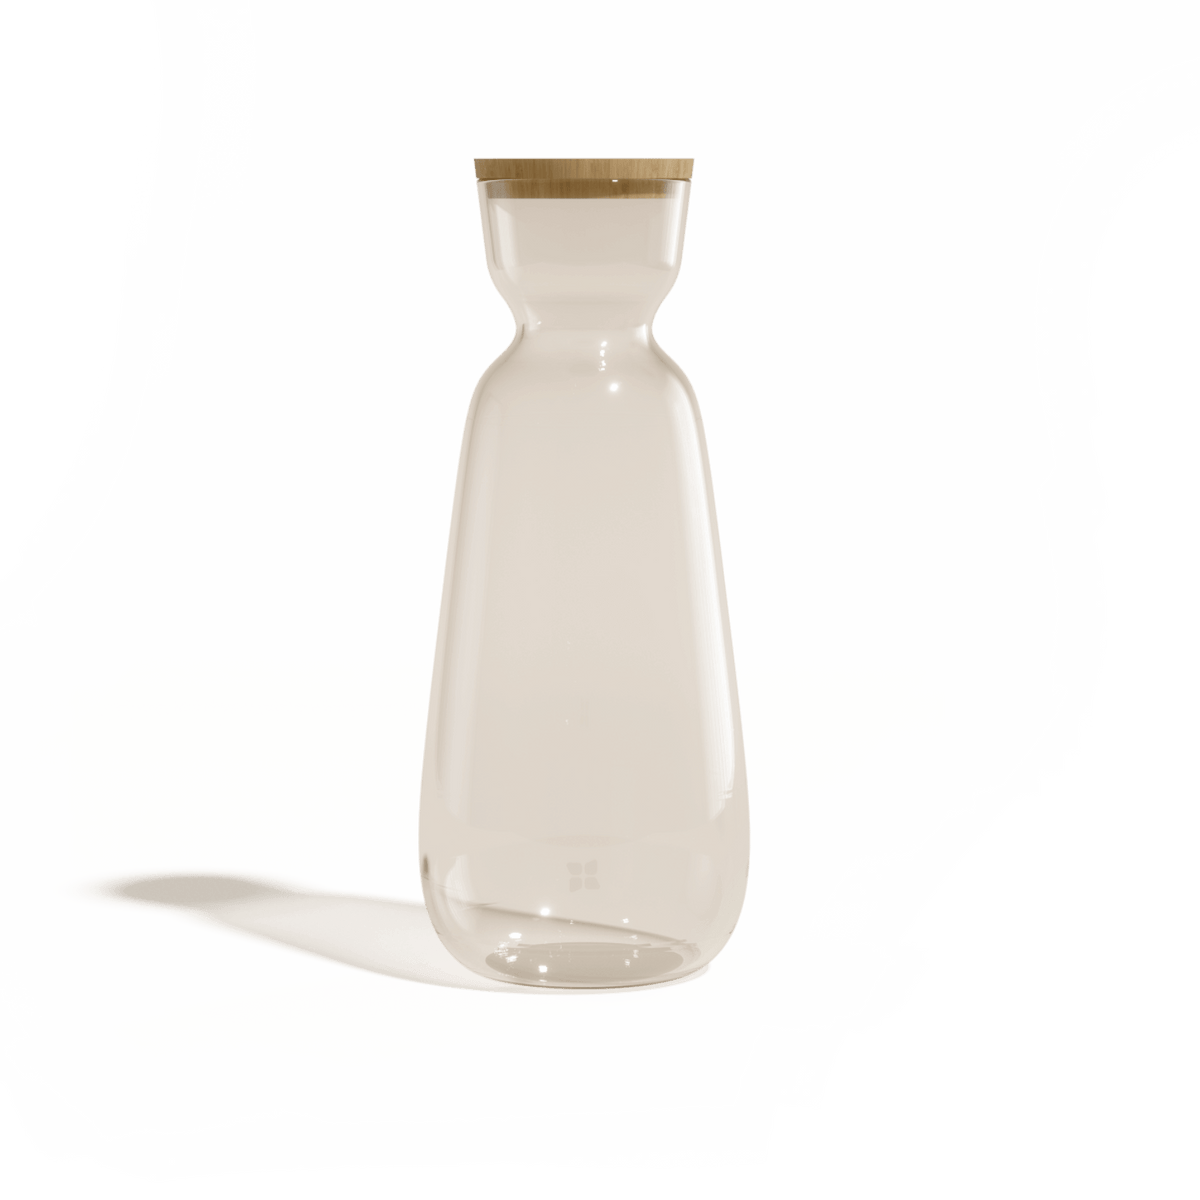 https://cdn.shopify.com/s/files/1/0274/4988/4706/products/waterdrop_glass_carafe_Clear_9245f0b8-2cb6-4406-8be5-c9c12c787eec_1200x.png?v=1688383643